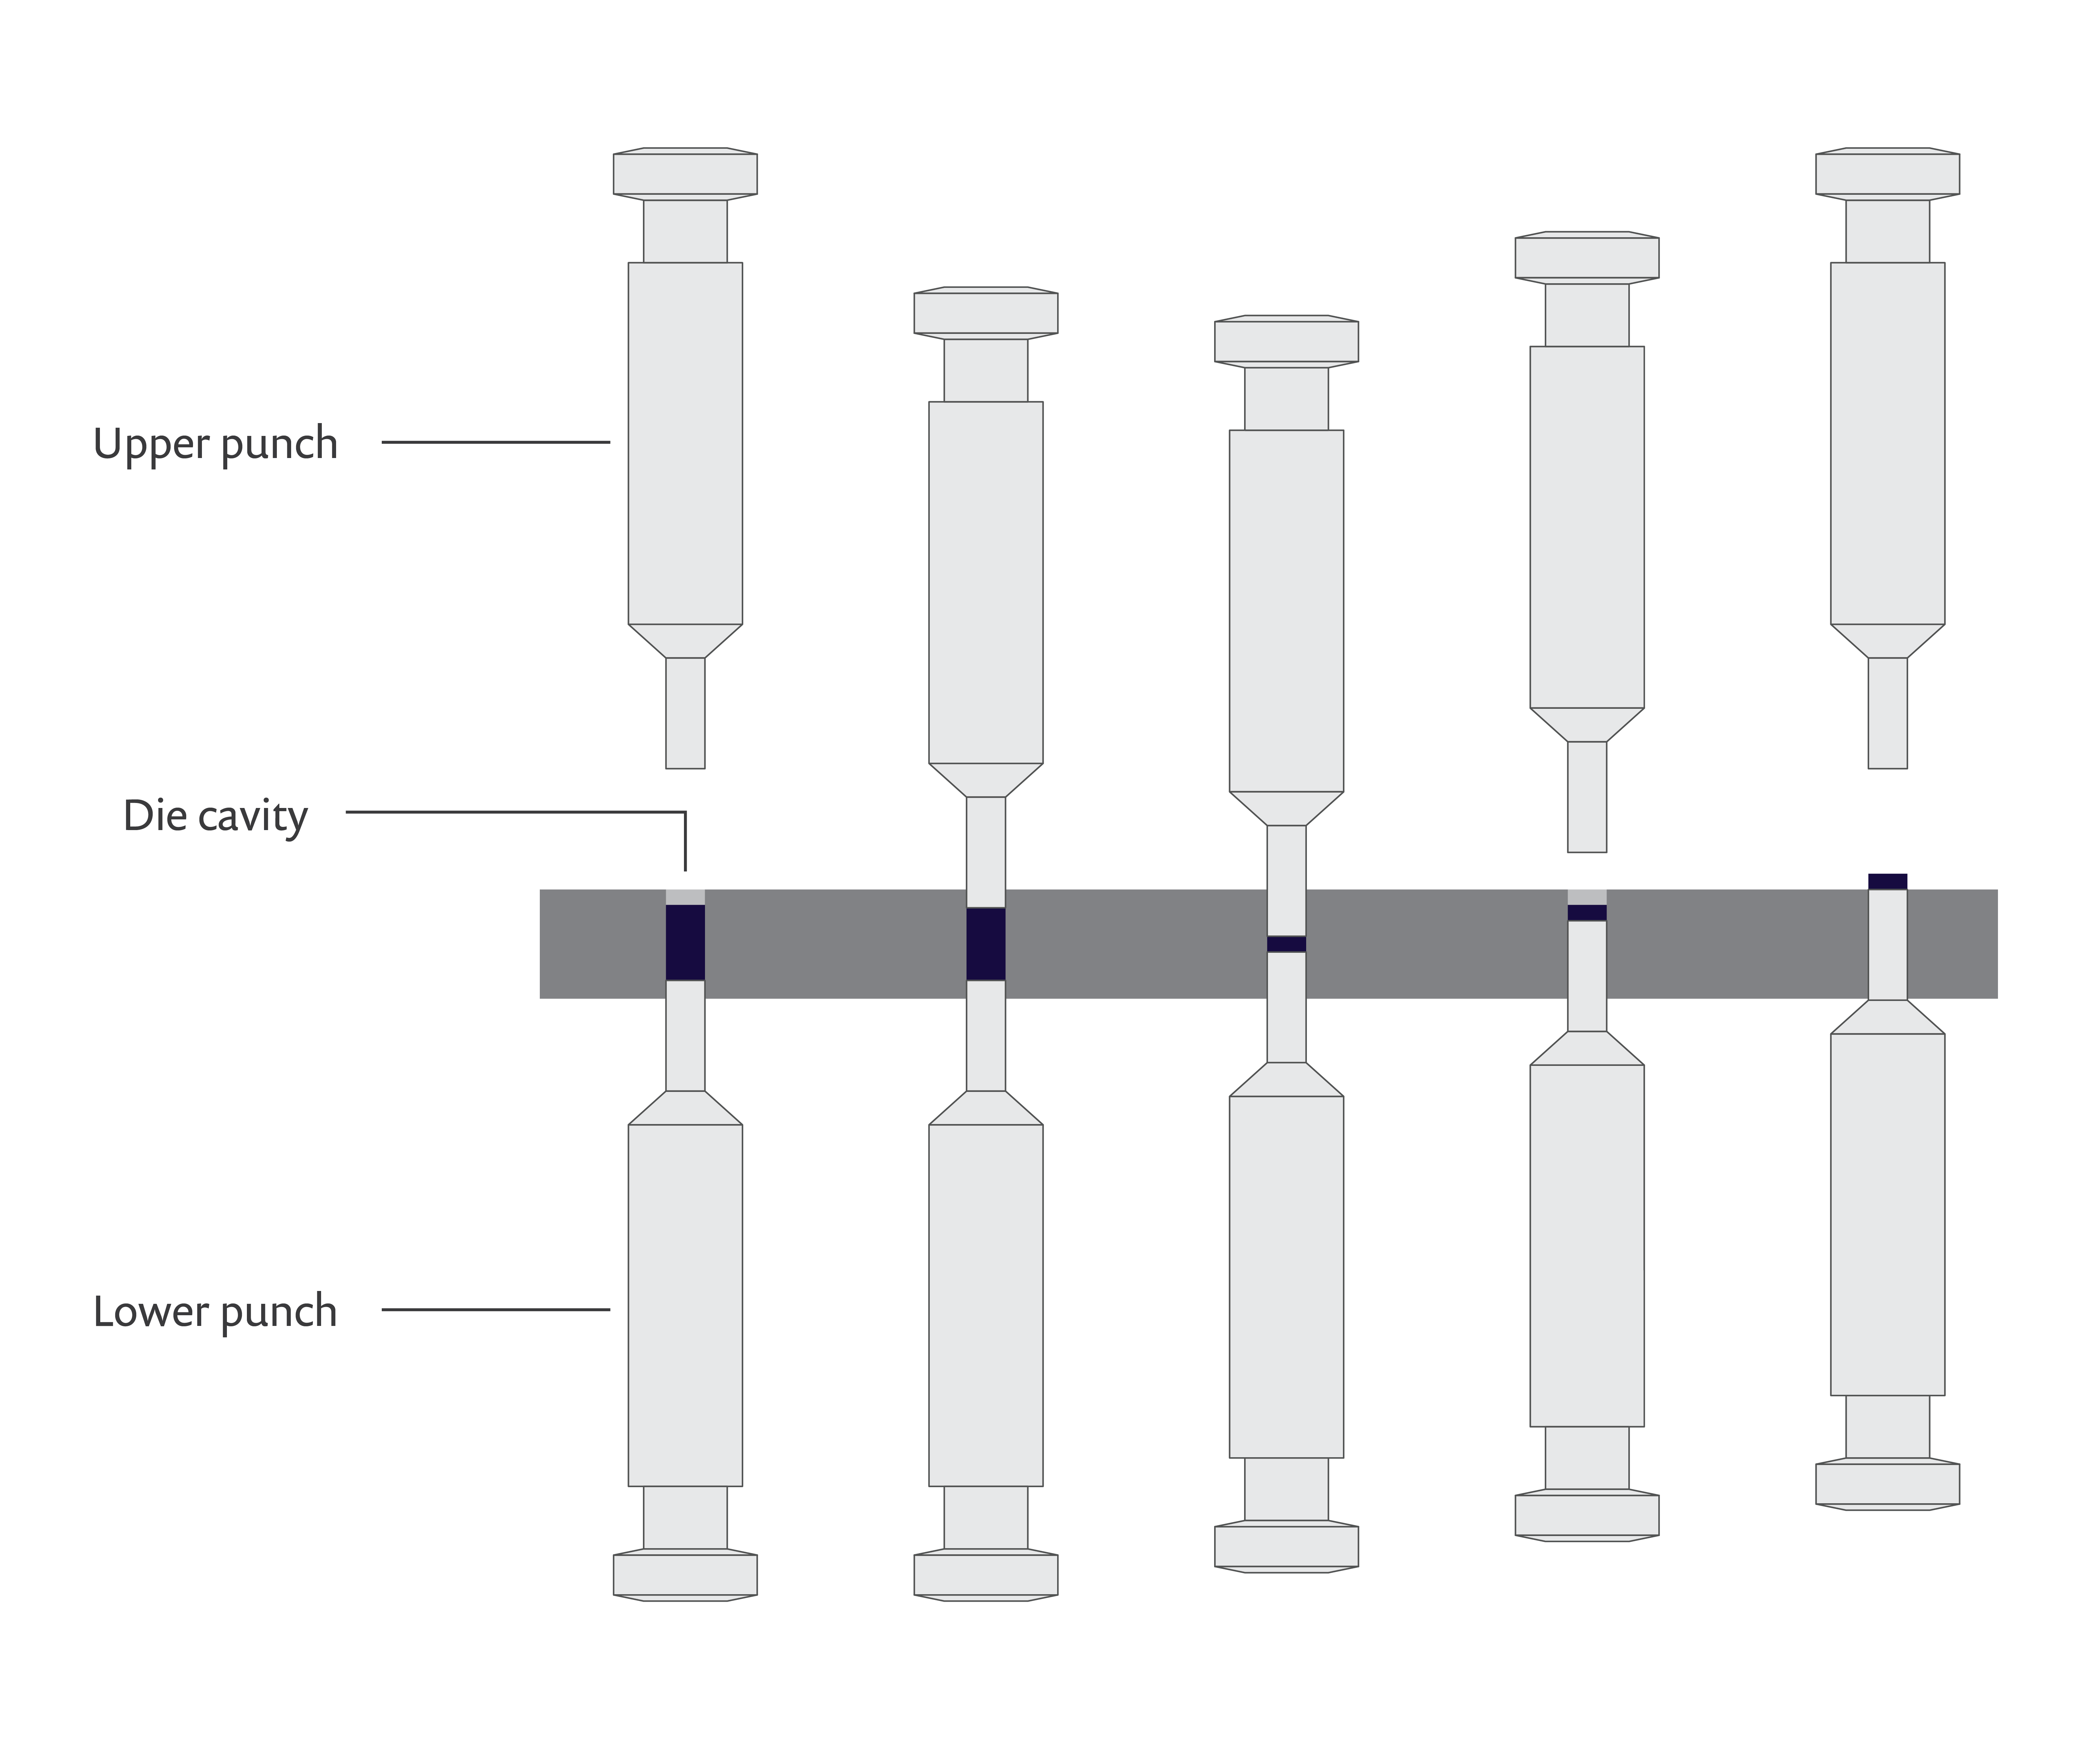 A schematic showing the pharmaceutical tableting process, which features an upper punch, a die cavity, and a lower punch.